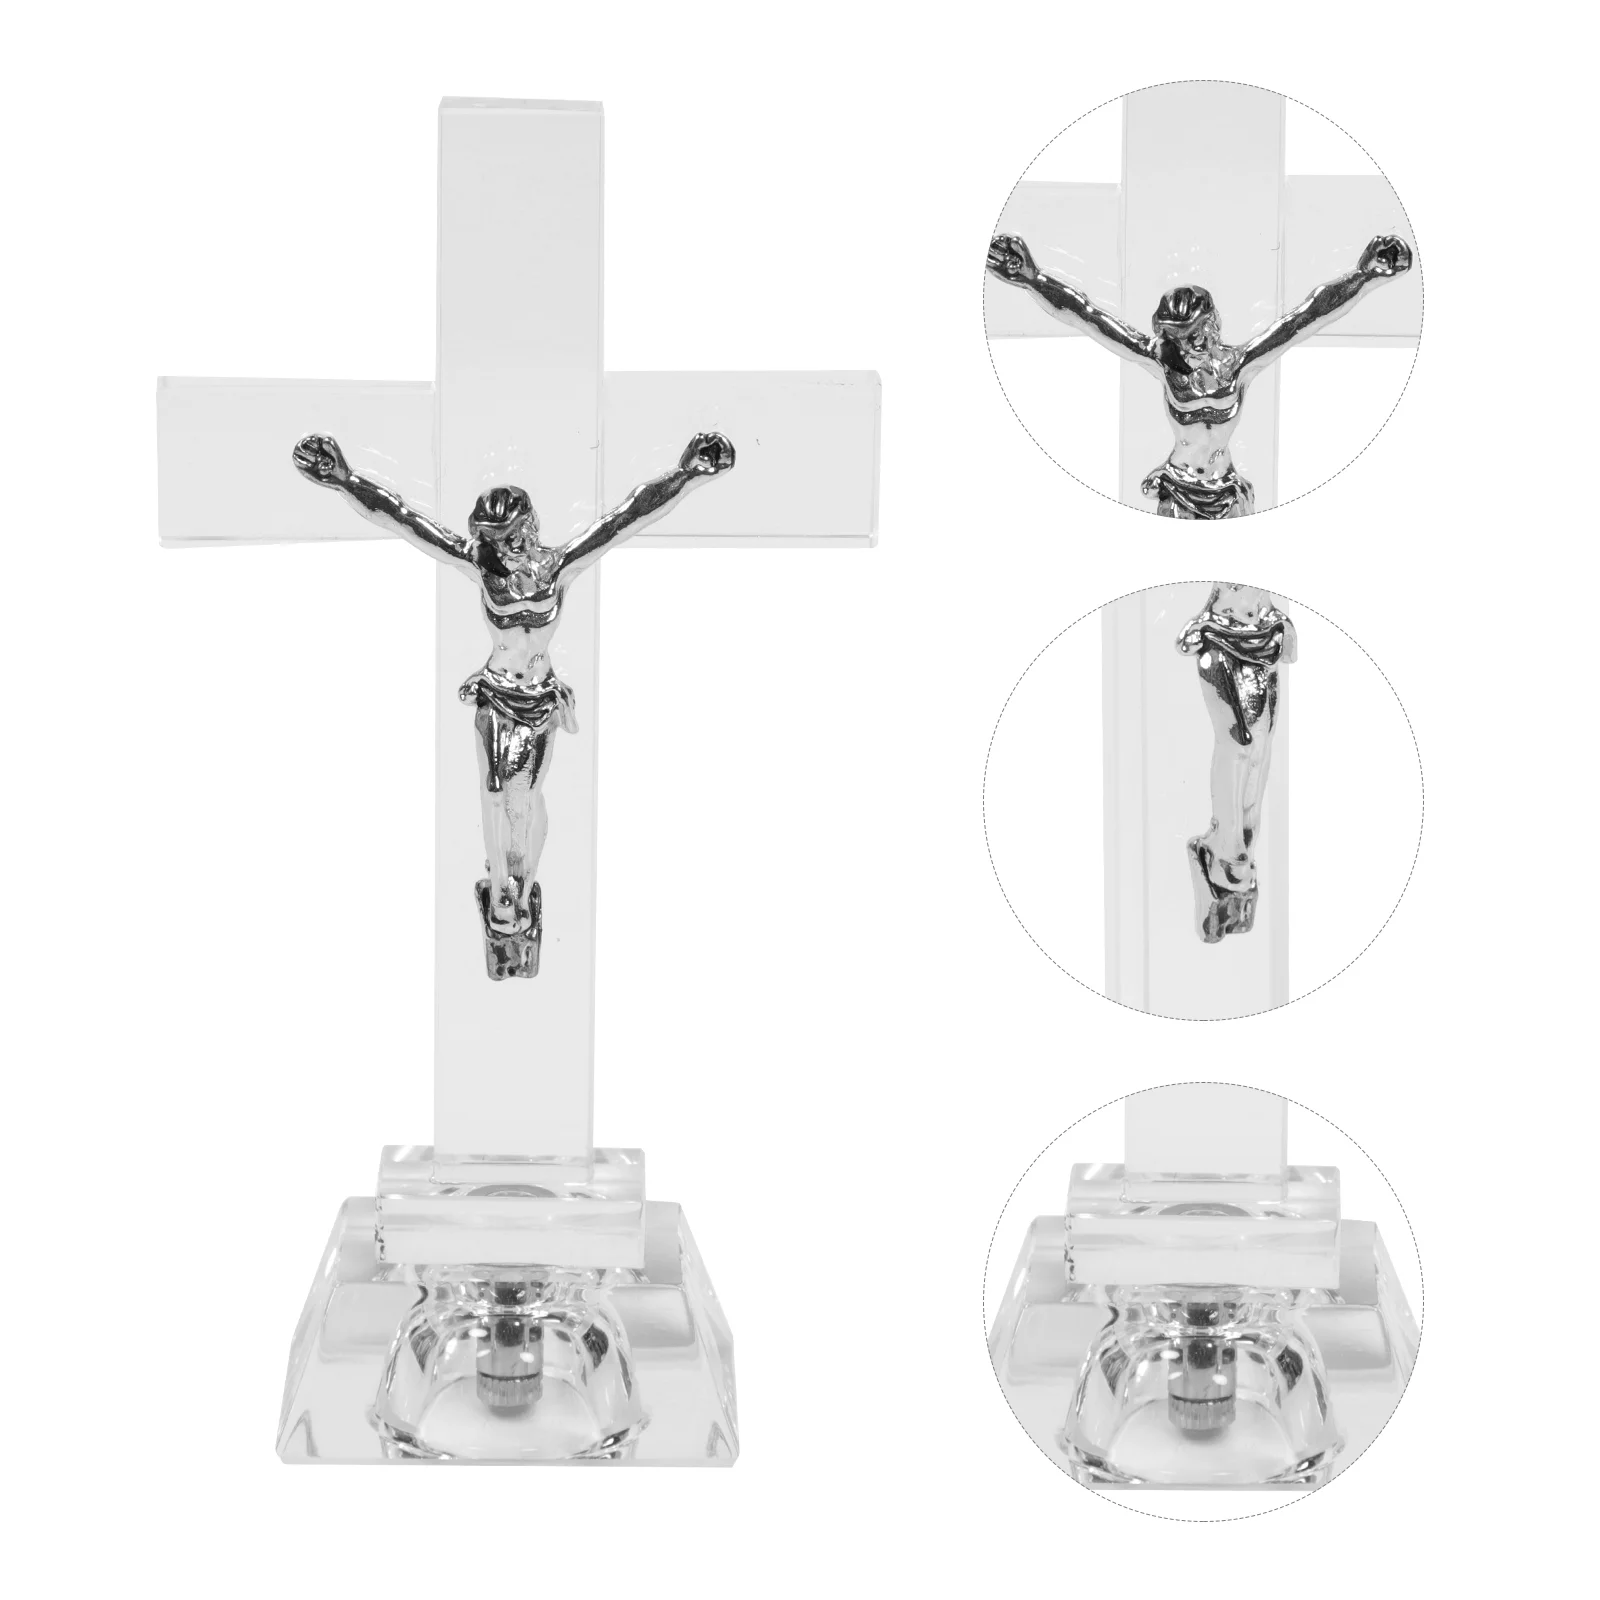 

Crystal Decorative Lamp Religious Cross Adornment Figurine Chic Gift Home Ornament Accents Church Cartoon Catholic articles